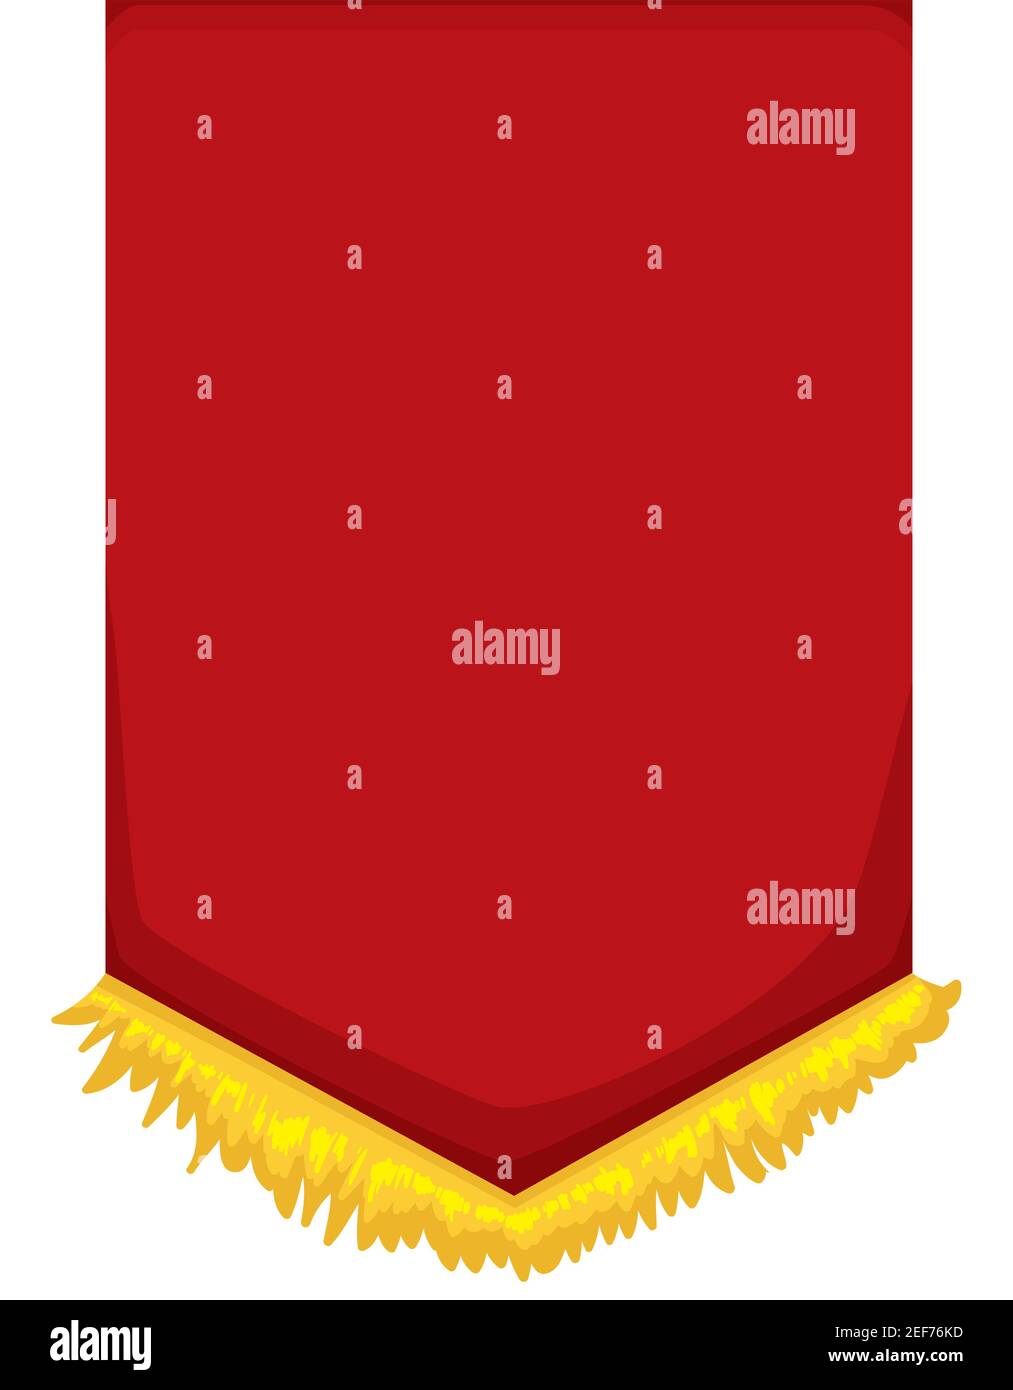 Template with hanging red pennant decorated with golden fringes, isolated over white background. Stock Vector